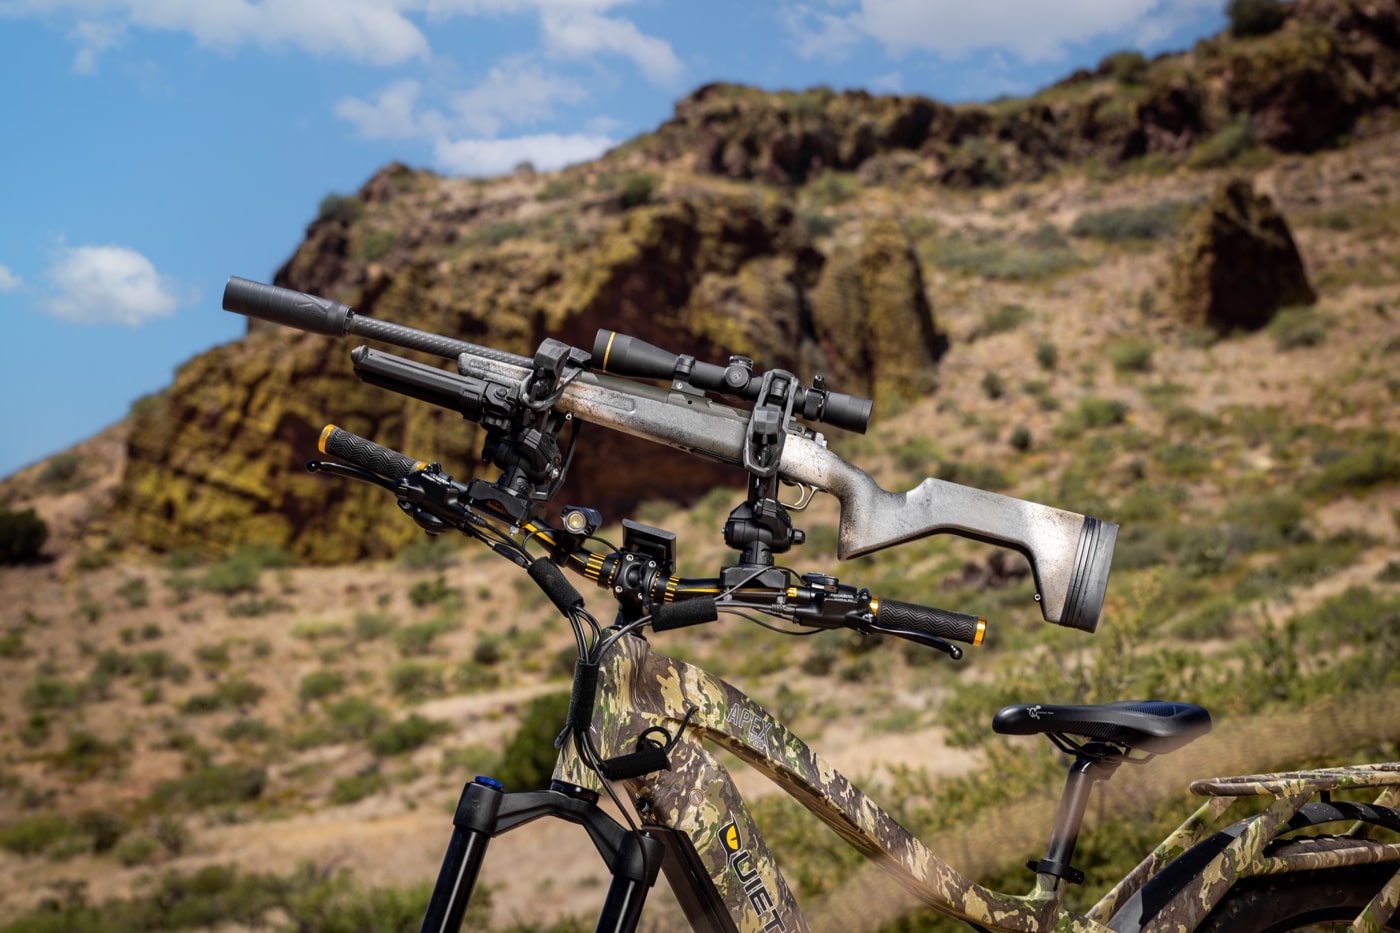 carrying a hunting rifle on an electric bike in the desert and woods